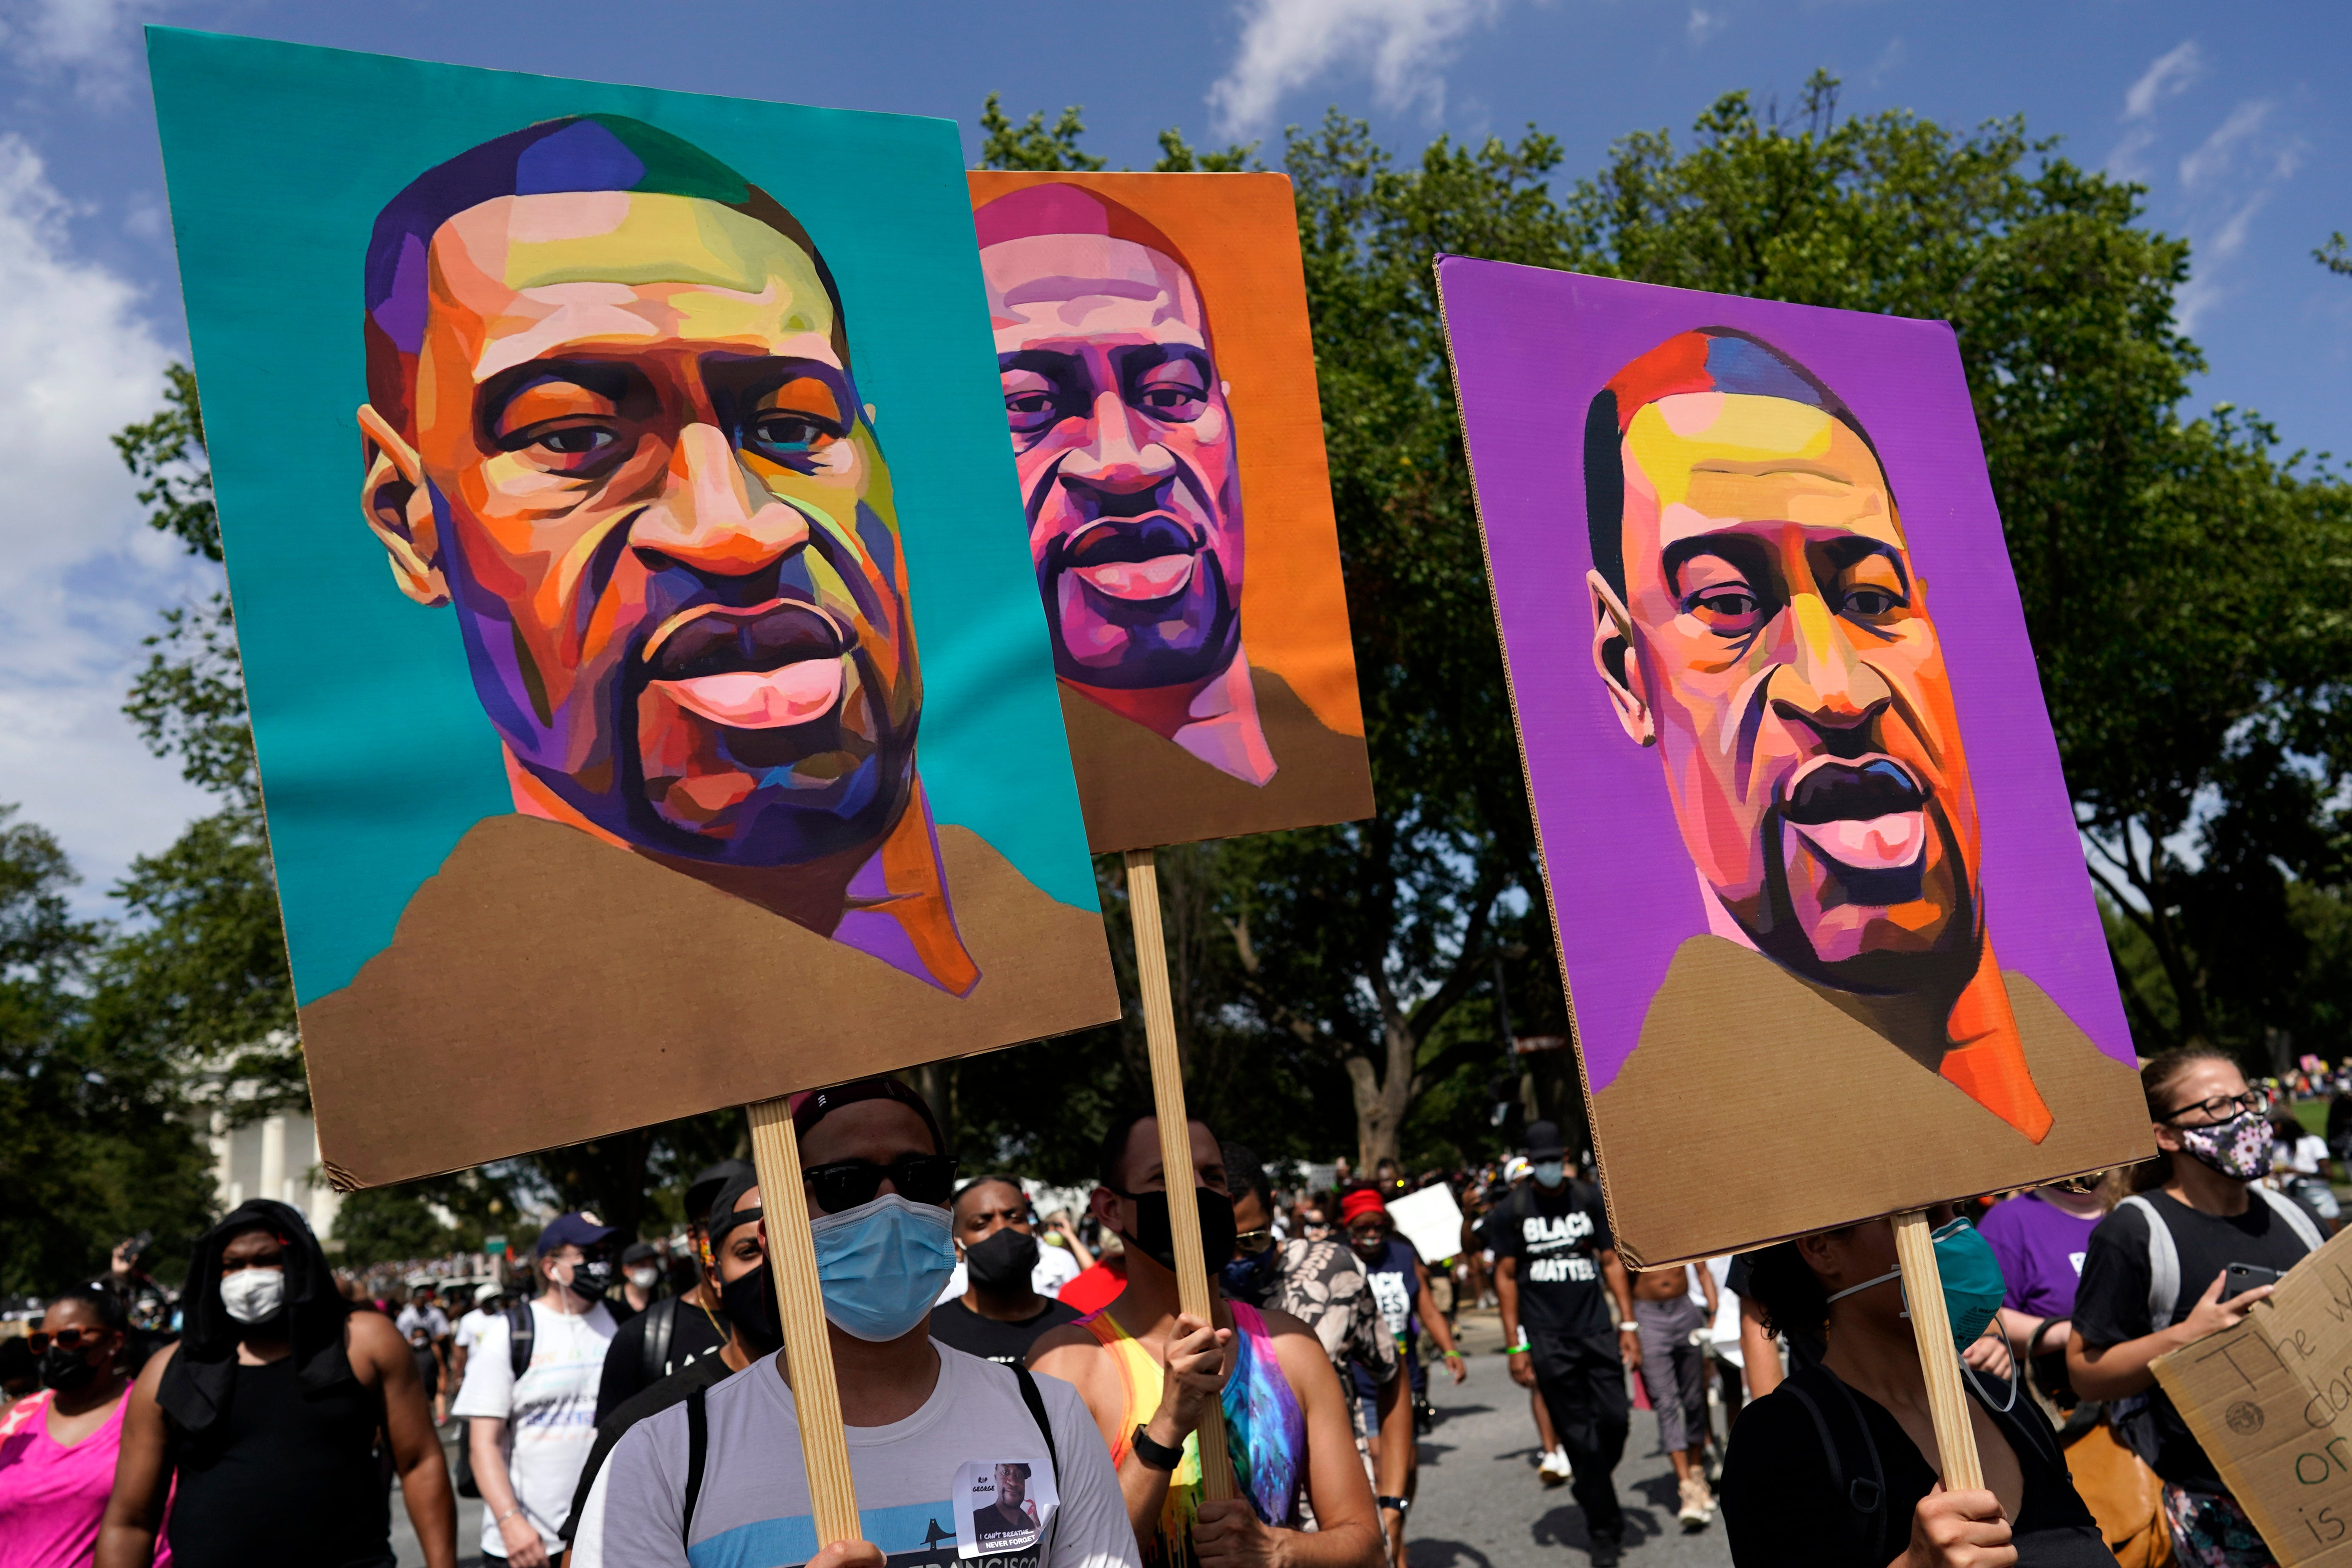 FILE - In this 28 August, 2020, file photo, people carry posters with George Floyd’s image on them as they march from the Lincoln Memorial to the Martin Luther King Jr Memorial in Washington. As the anniversary of George Floyd’s murder approaches, a poll has revealed that Black Americans are more likely to experience potentially dangerous interactions with the police